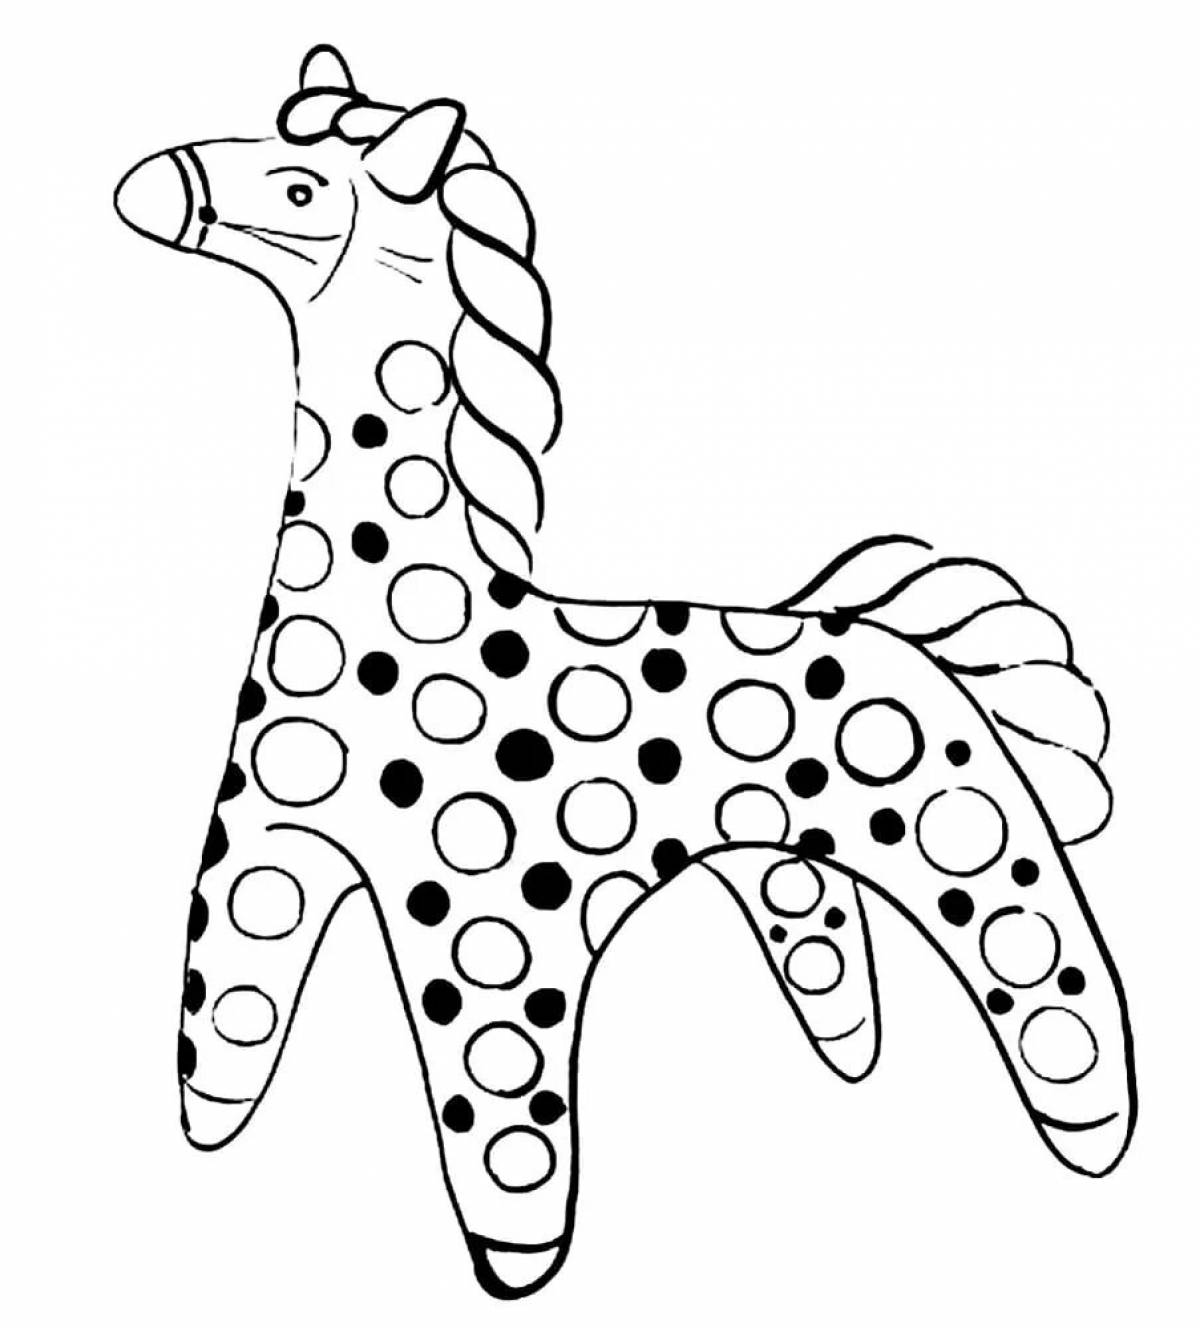 Colorful Dymkovo horse coloring pages for kids